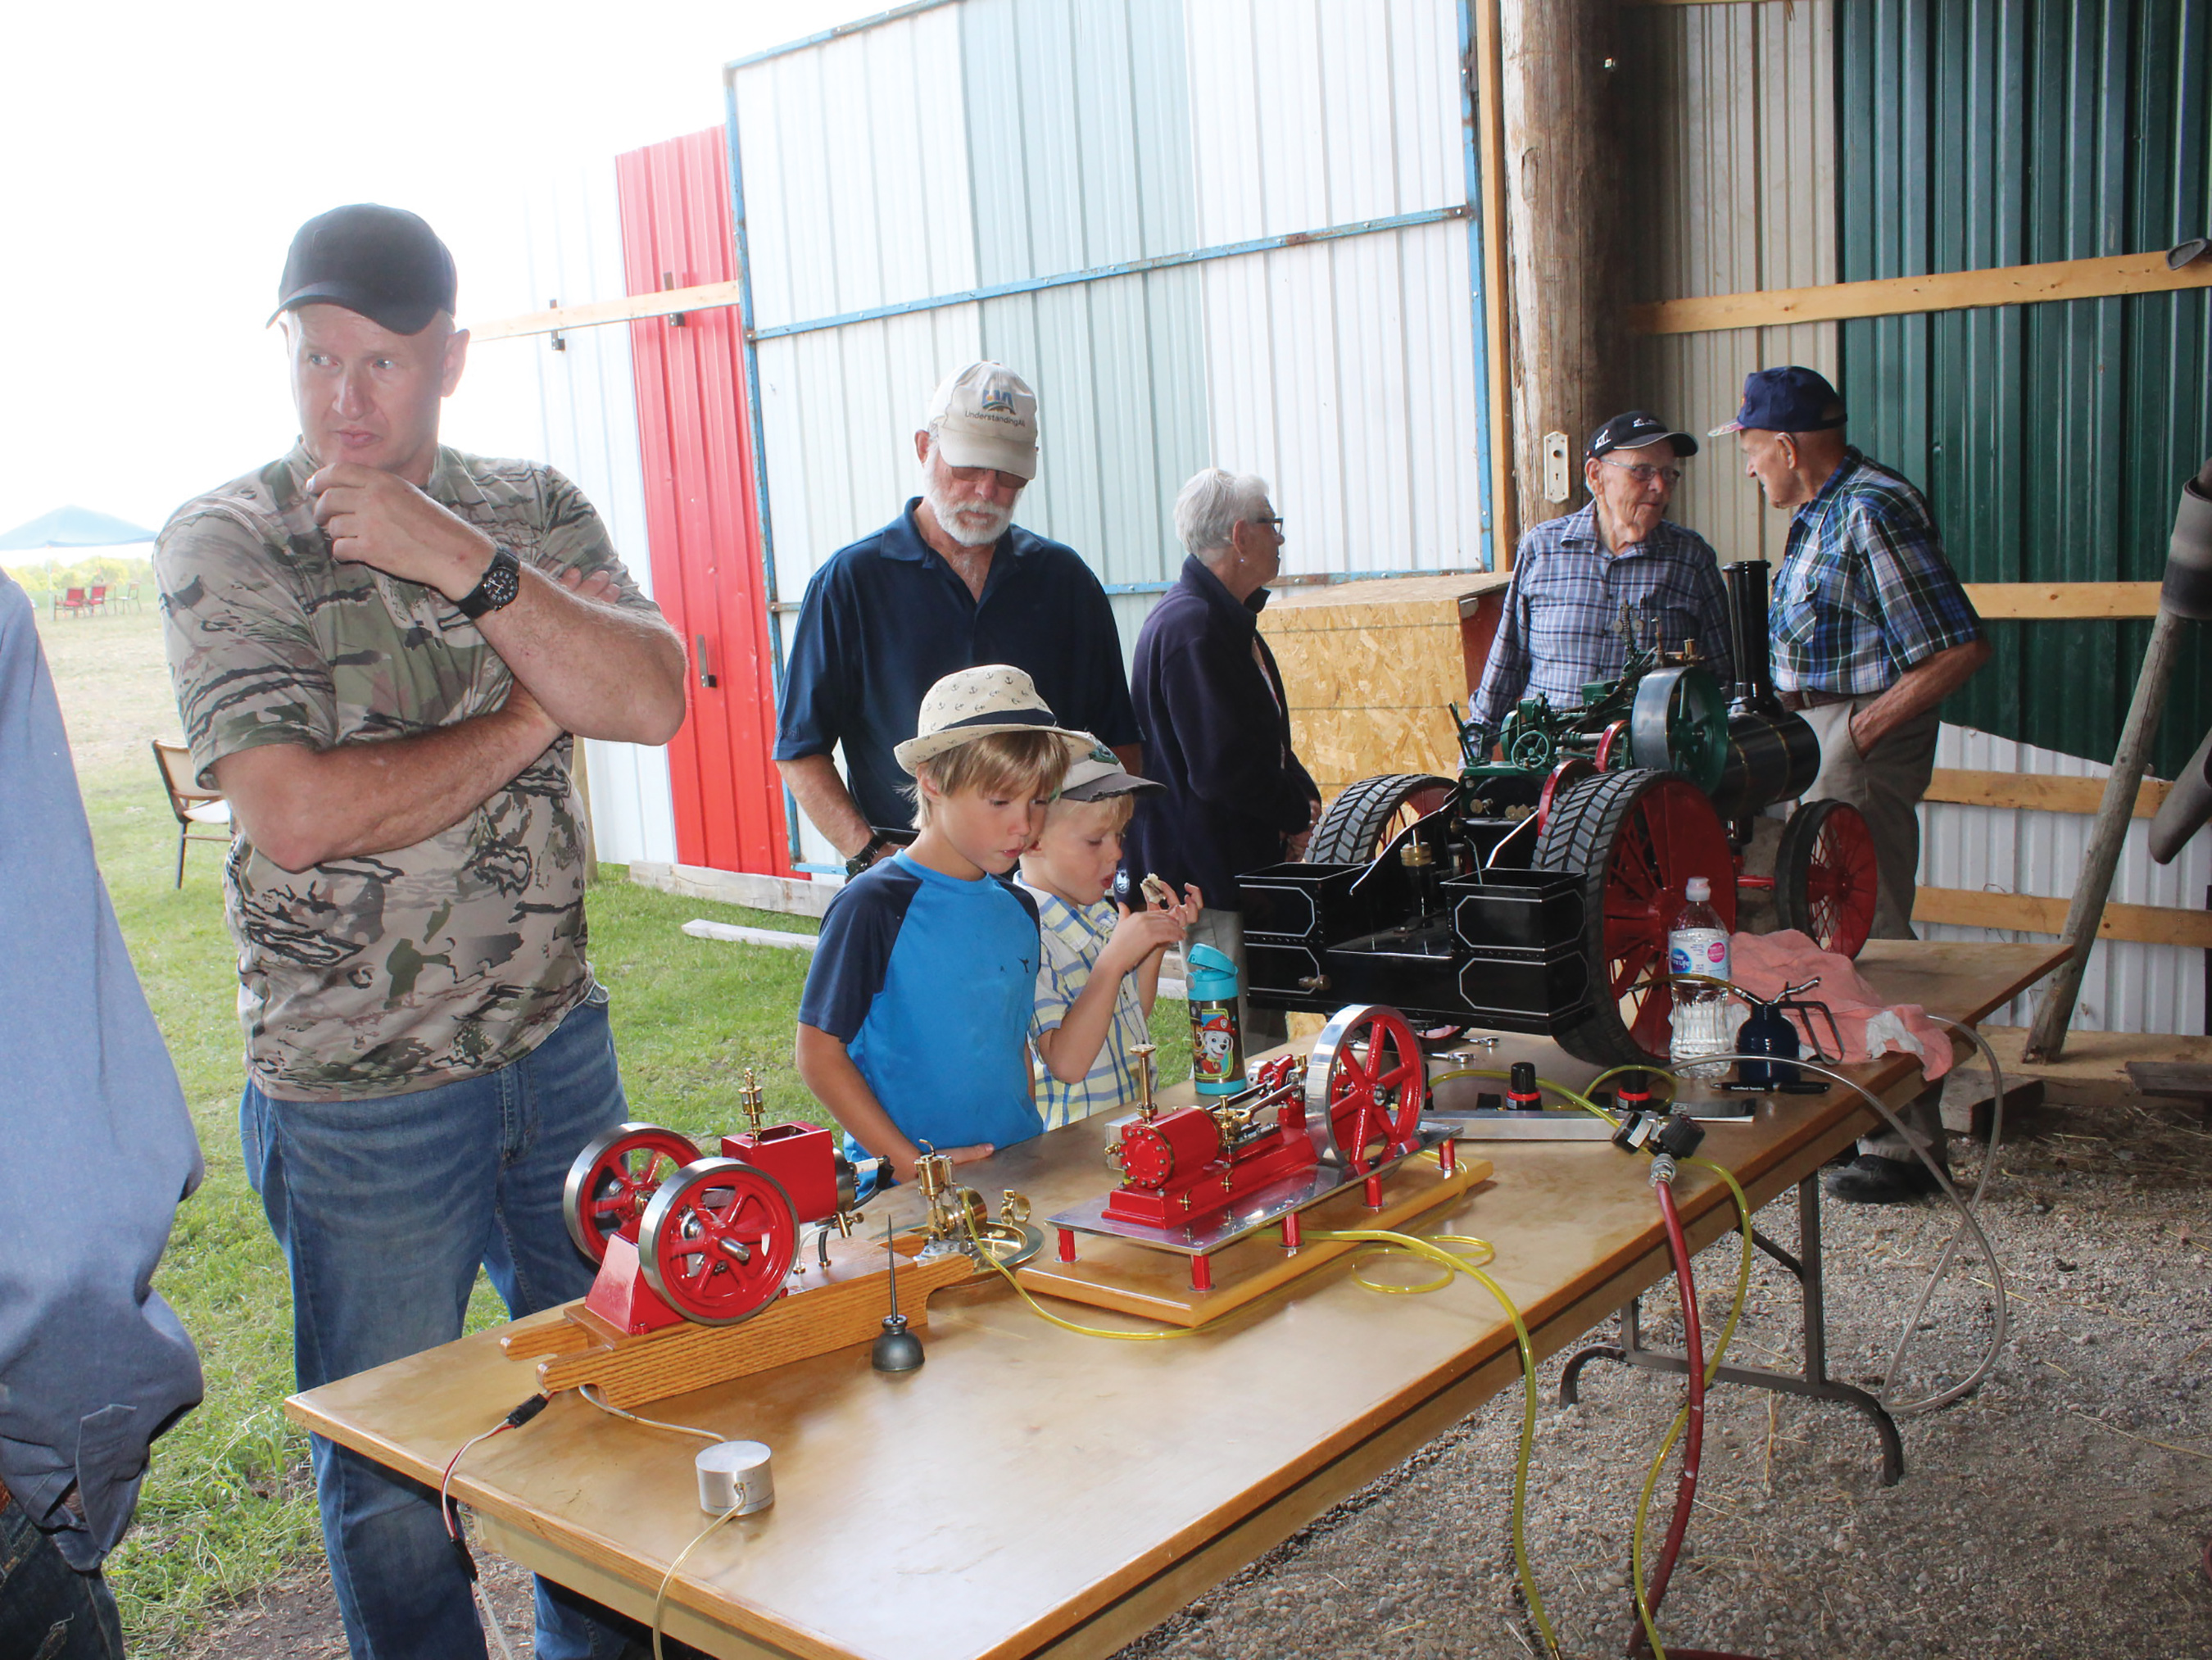 Children looking at some of the engines on display.